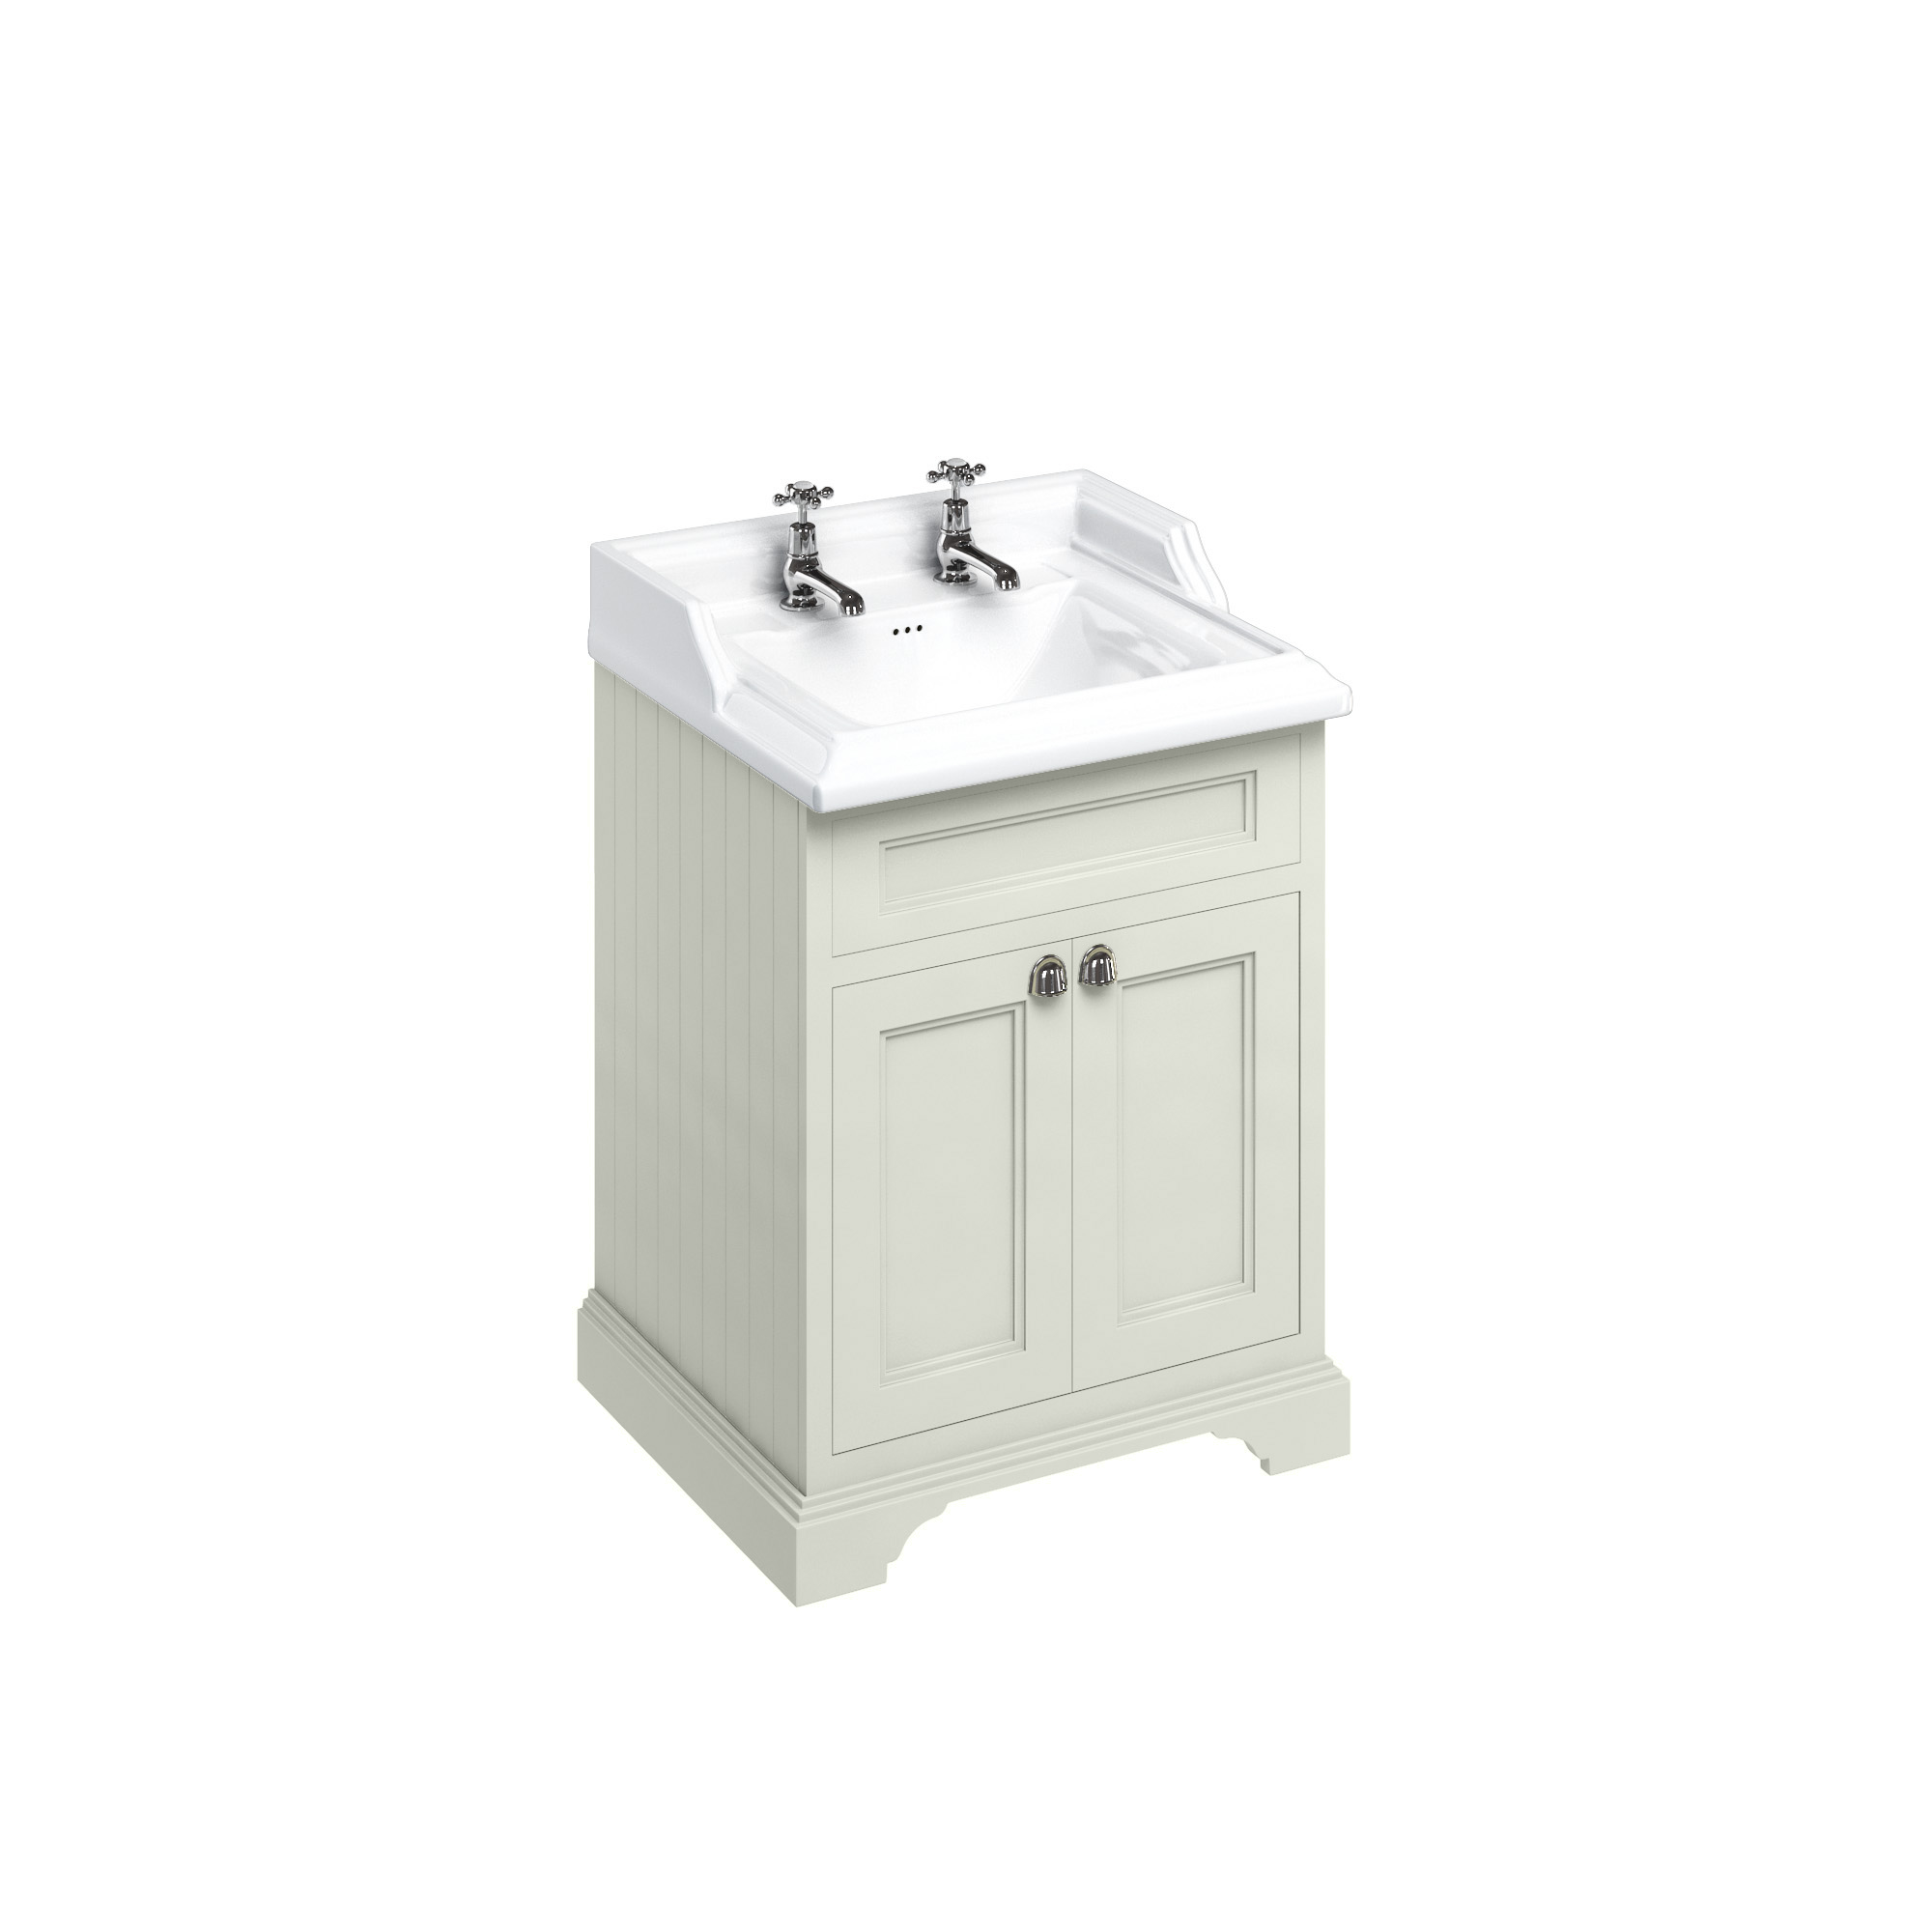 Freestanding 65 Vanity Unit with doors - Sand and Classic basin 2 tap holes